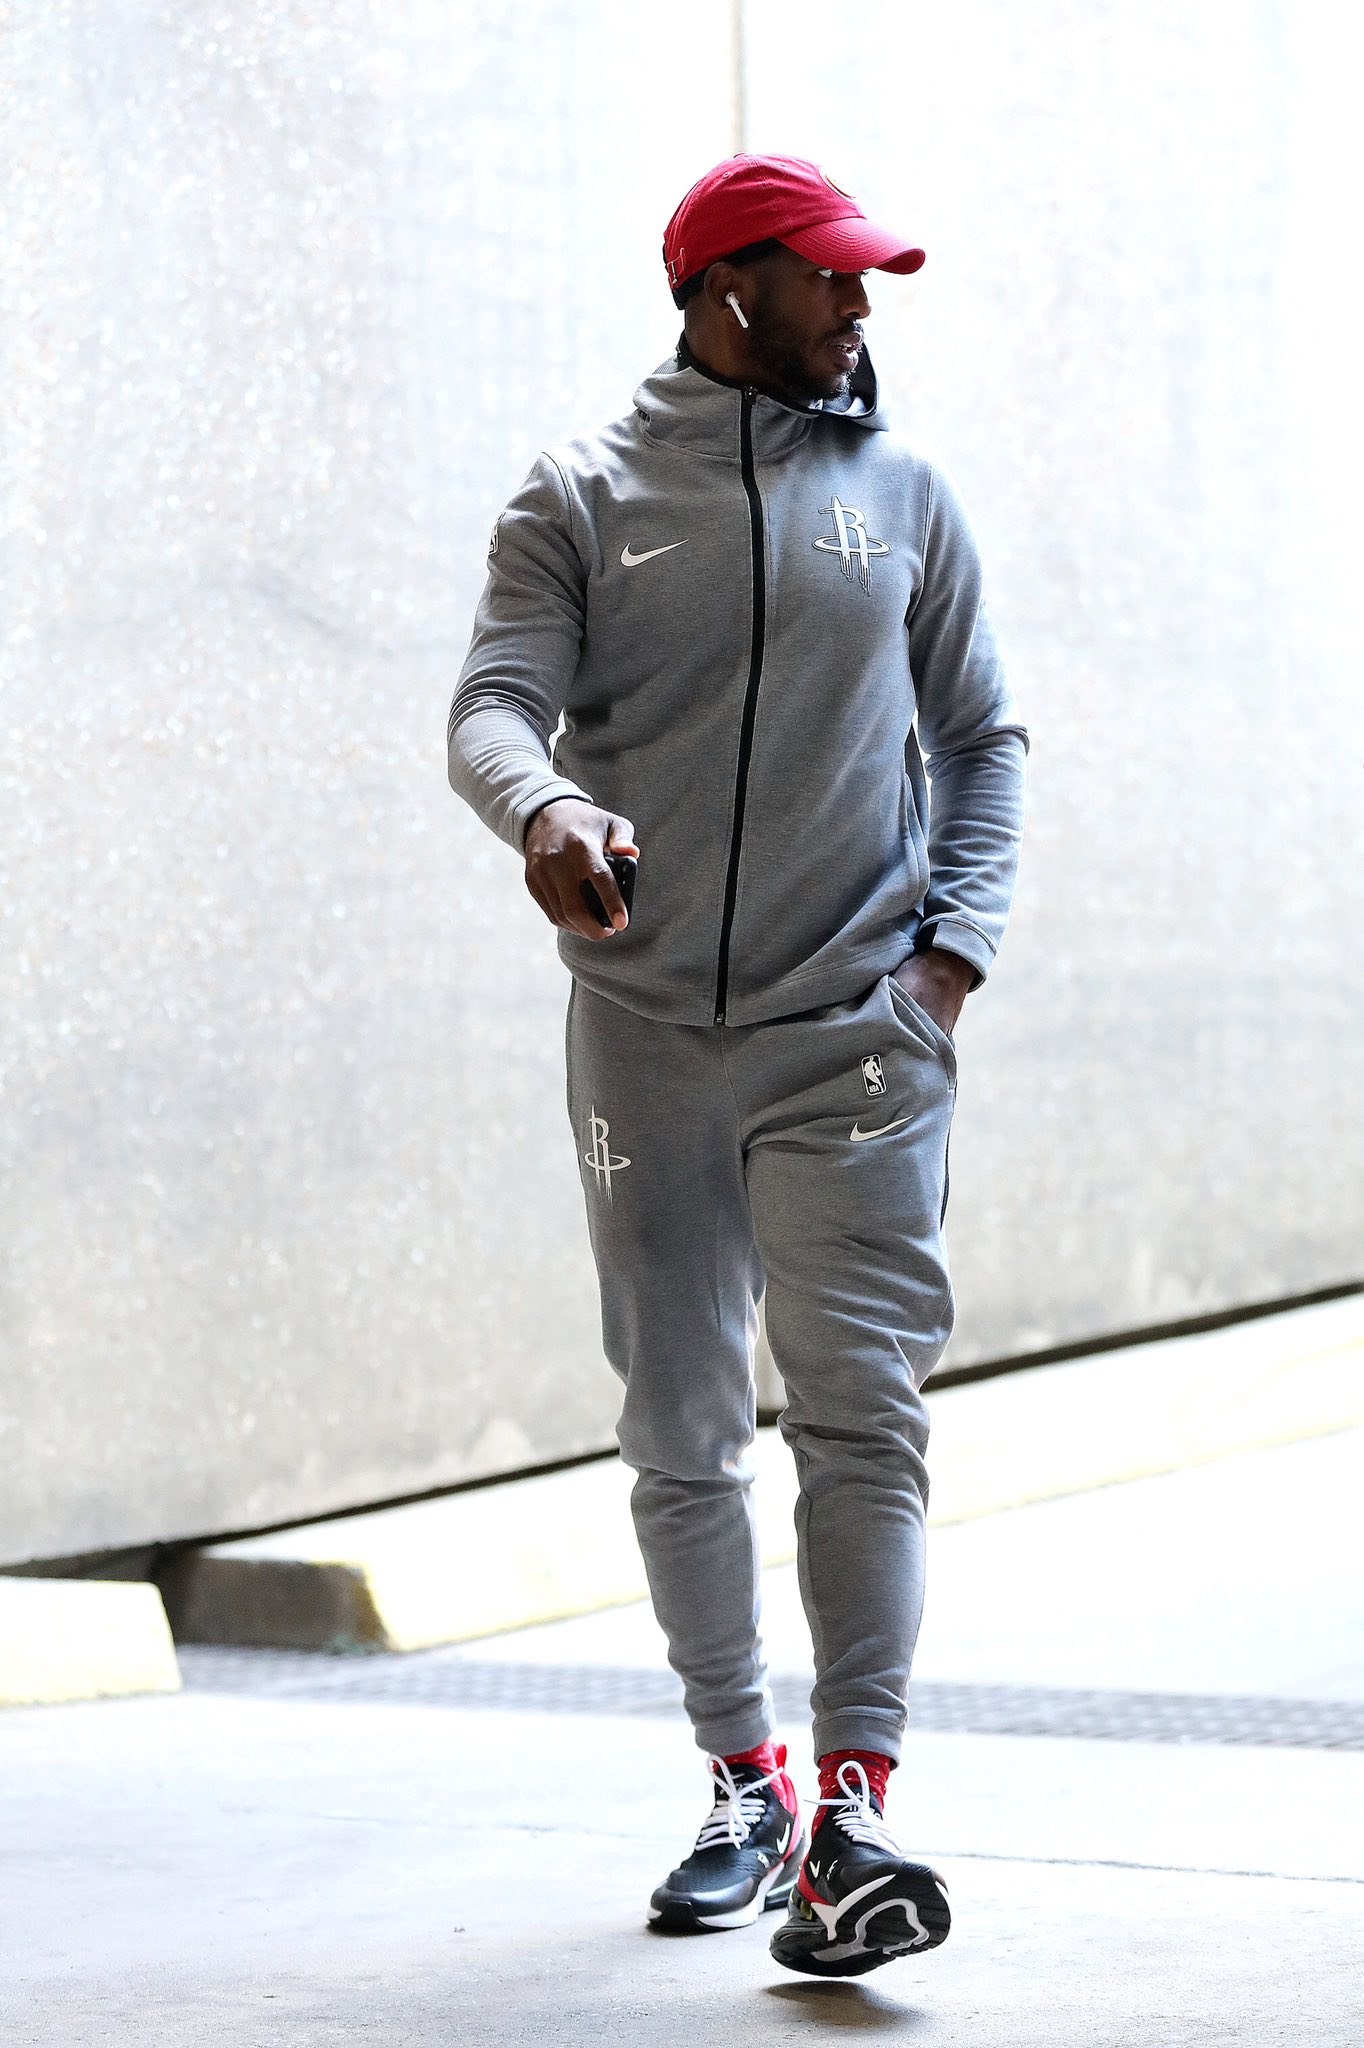 B/R Kicks Twitter: ".@CP3 arrives for the start of preseason in the Nike Air Max 270. Very cozy https://t.co/WsMyr2rxMZ" / Twitter